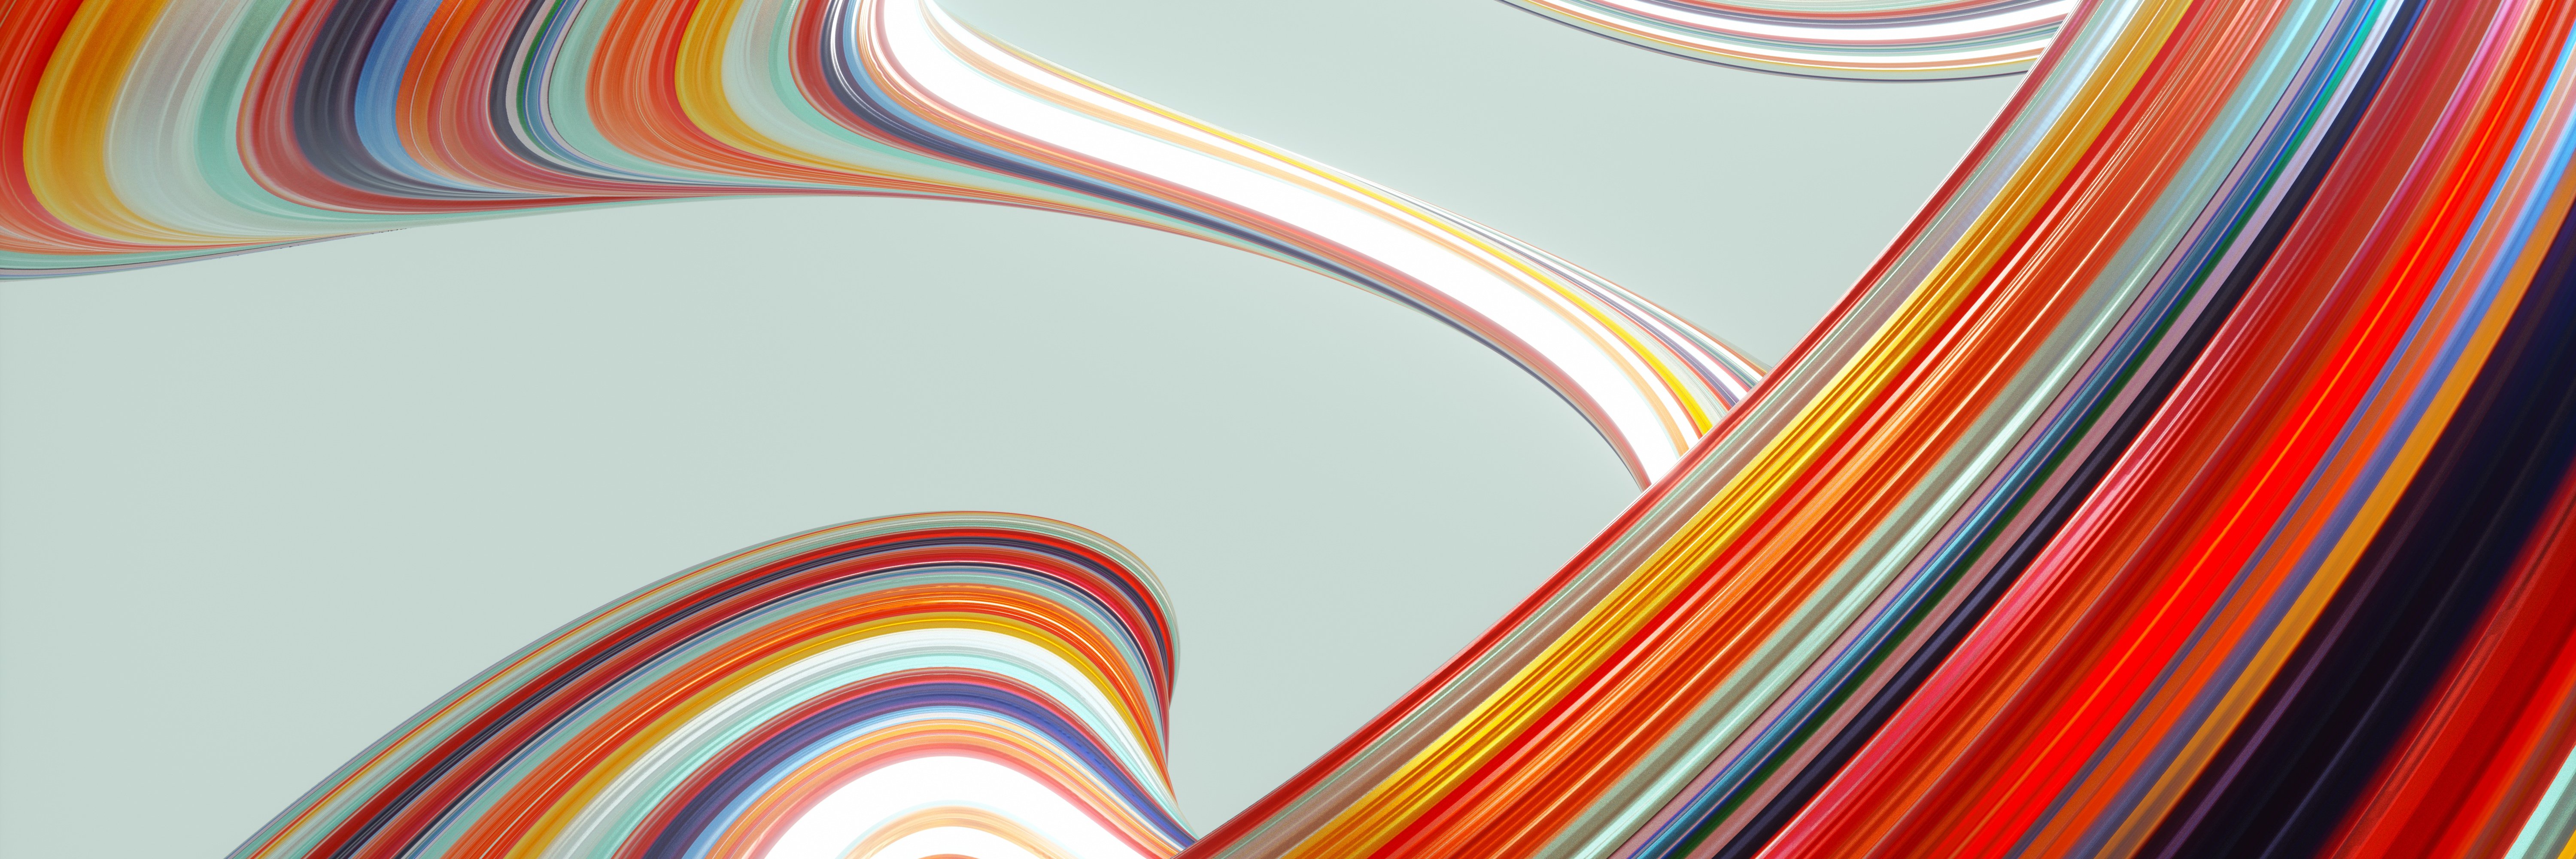 Digital generated image of multi coloured curved shape with striped pattern against grey background.